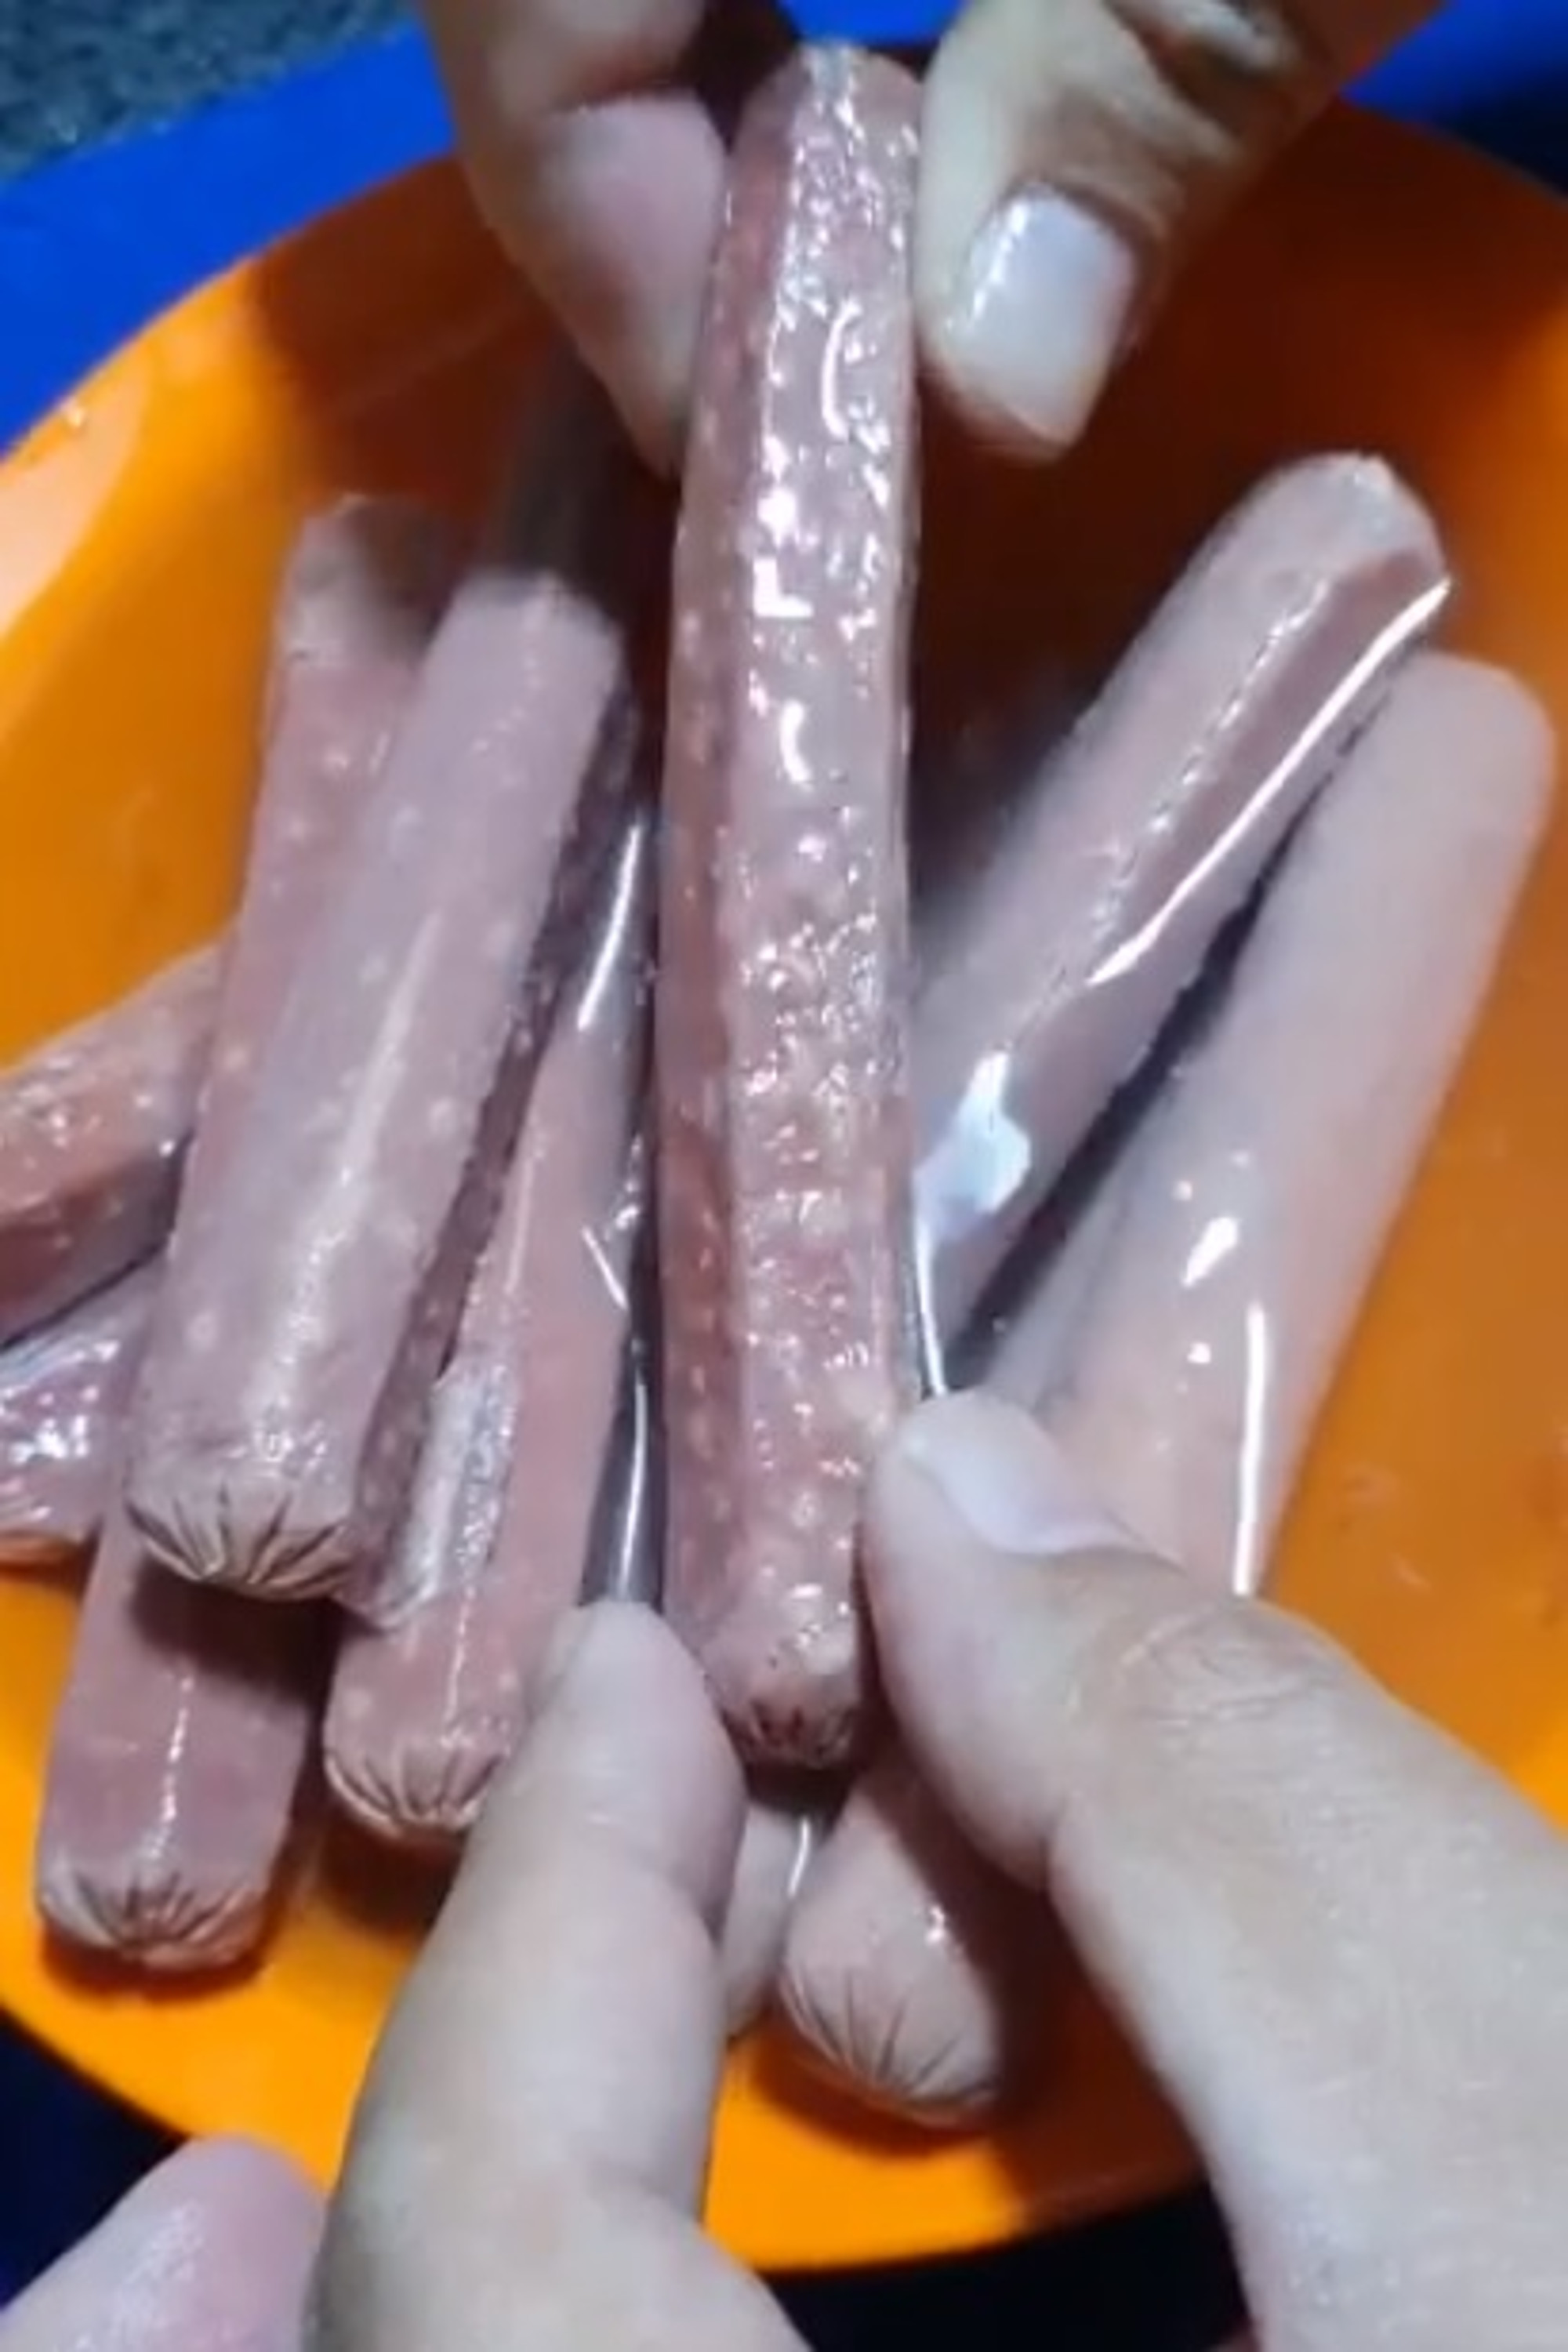 Read more about the article Shopper Finds Disgusting White Worms In Pack Of Hot Dogs